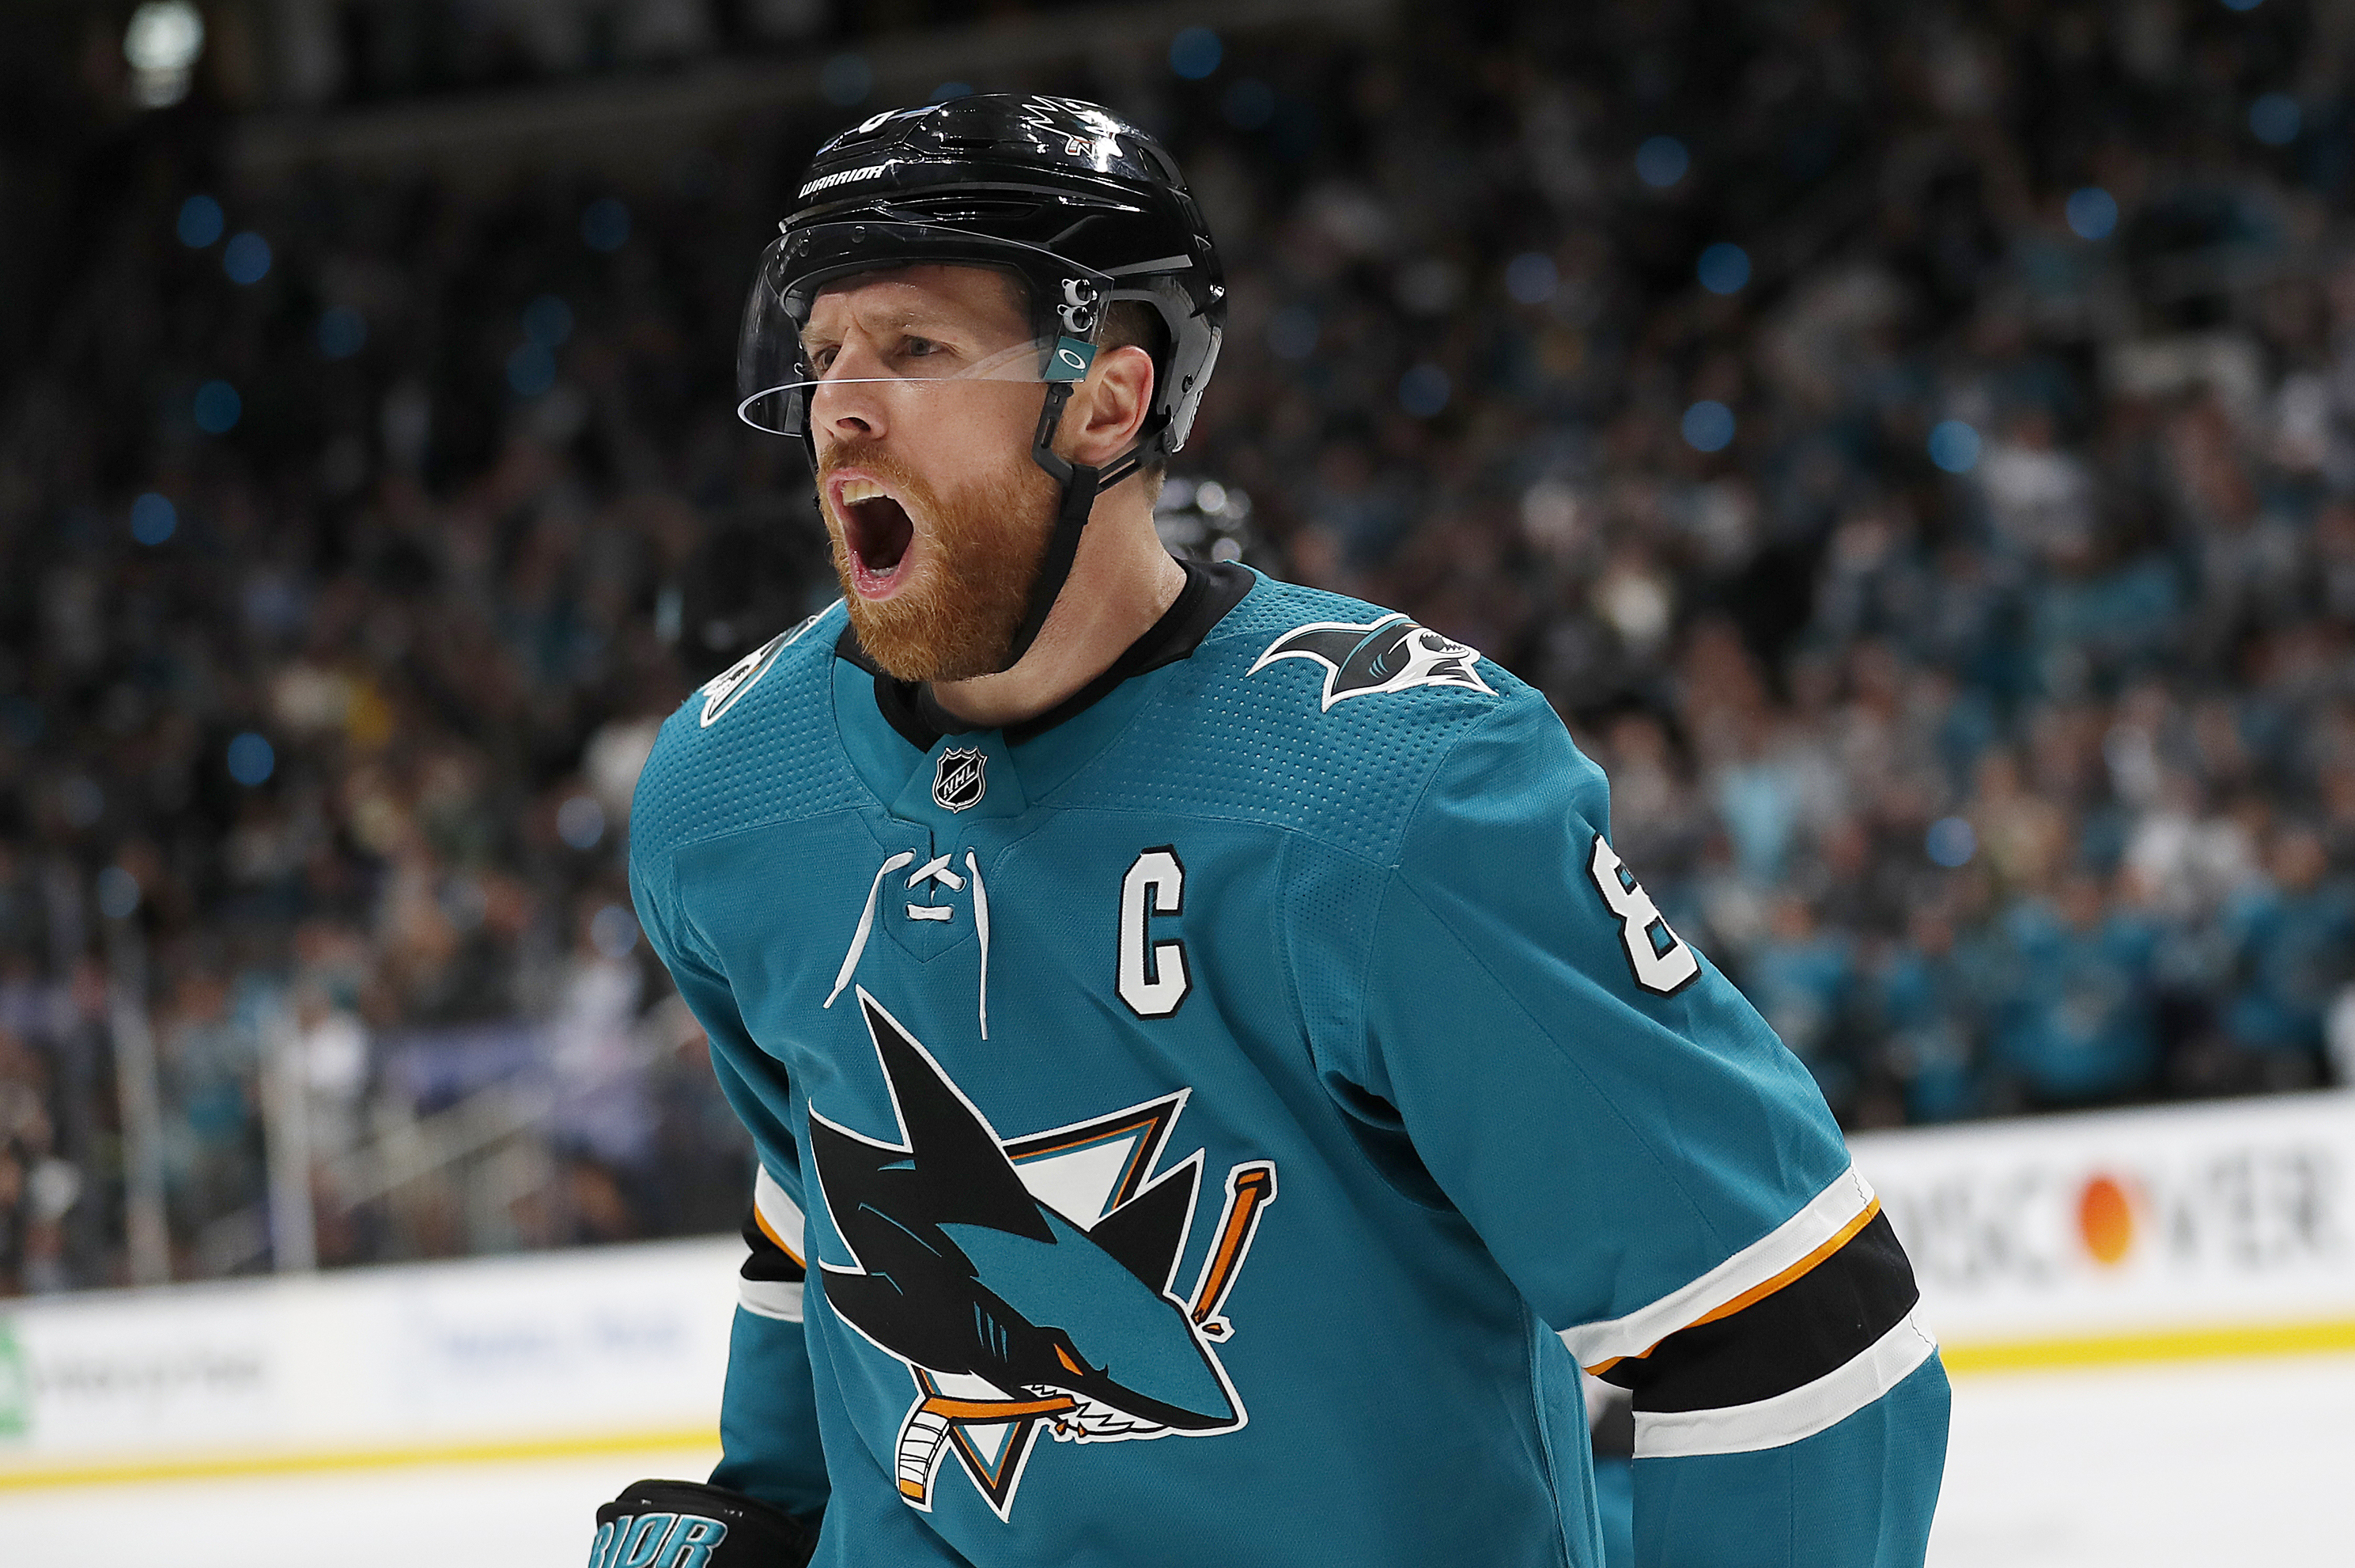 Blues face a Sharks team that has Pavelski back from a nasty head injury